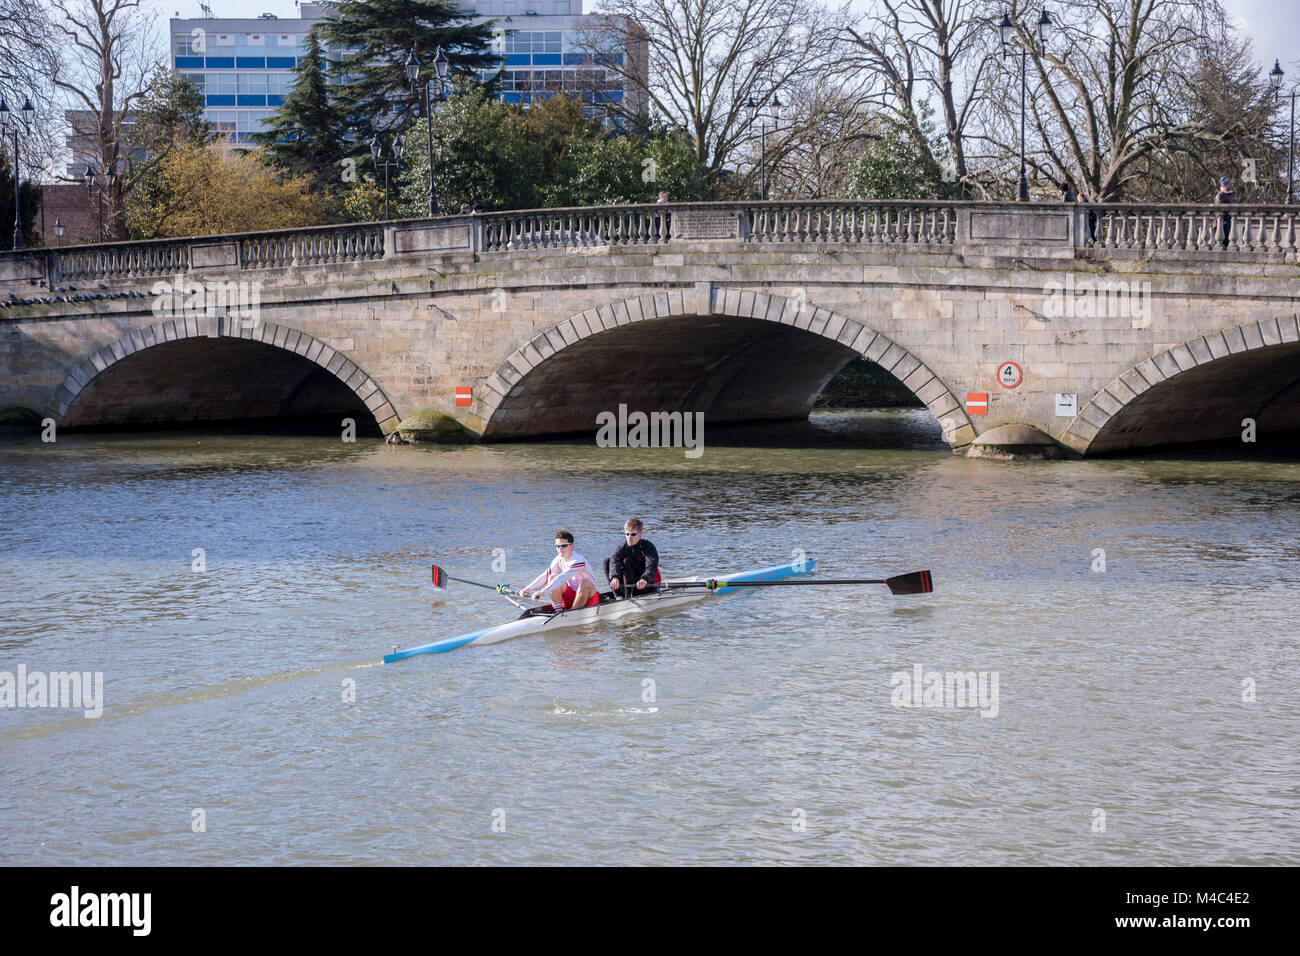 Bedford, Bedfordshire, UK. 15th February 2018. A cold bright start to the day for walkers and rowers along The River Great Ouse, Credit: Keith J Smith./Alamy Live News Stock Photo